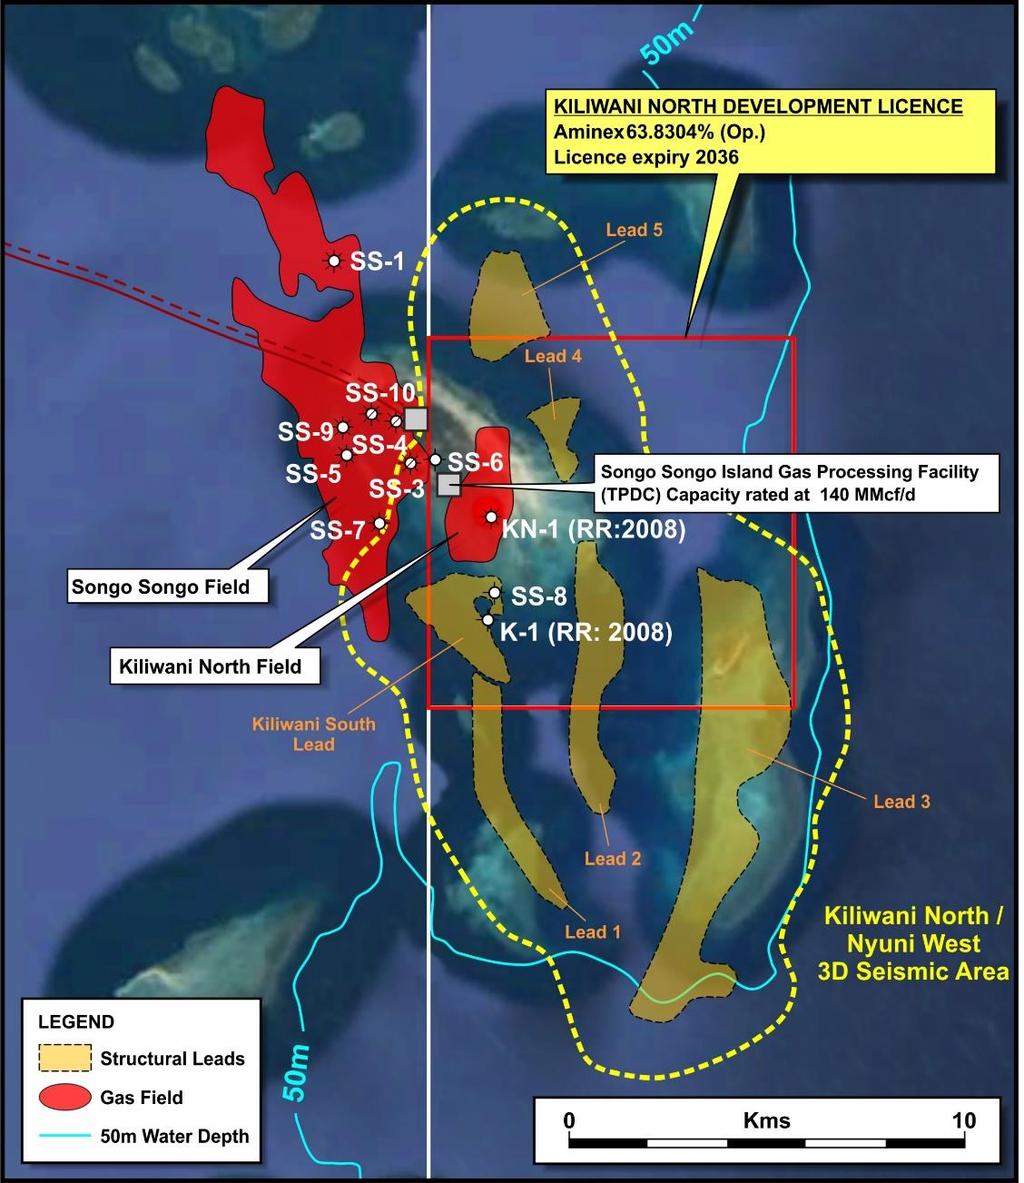 Kiliwani North Development Licence Licence terms to 2036 with no further commitments On trend with the large Songo Songo gas field which produces NW corner of the island Existing gas sales